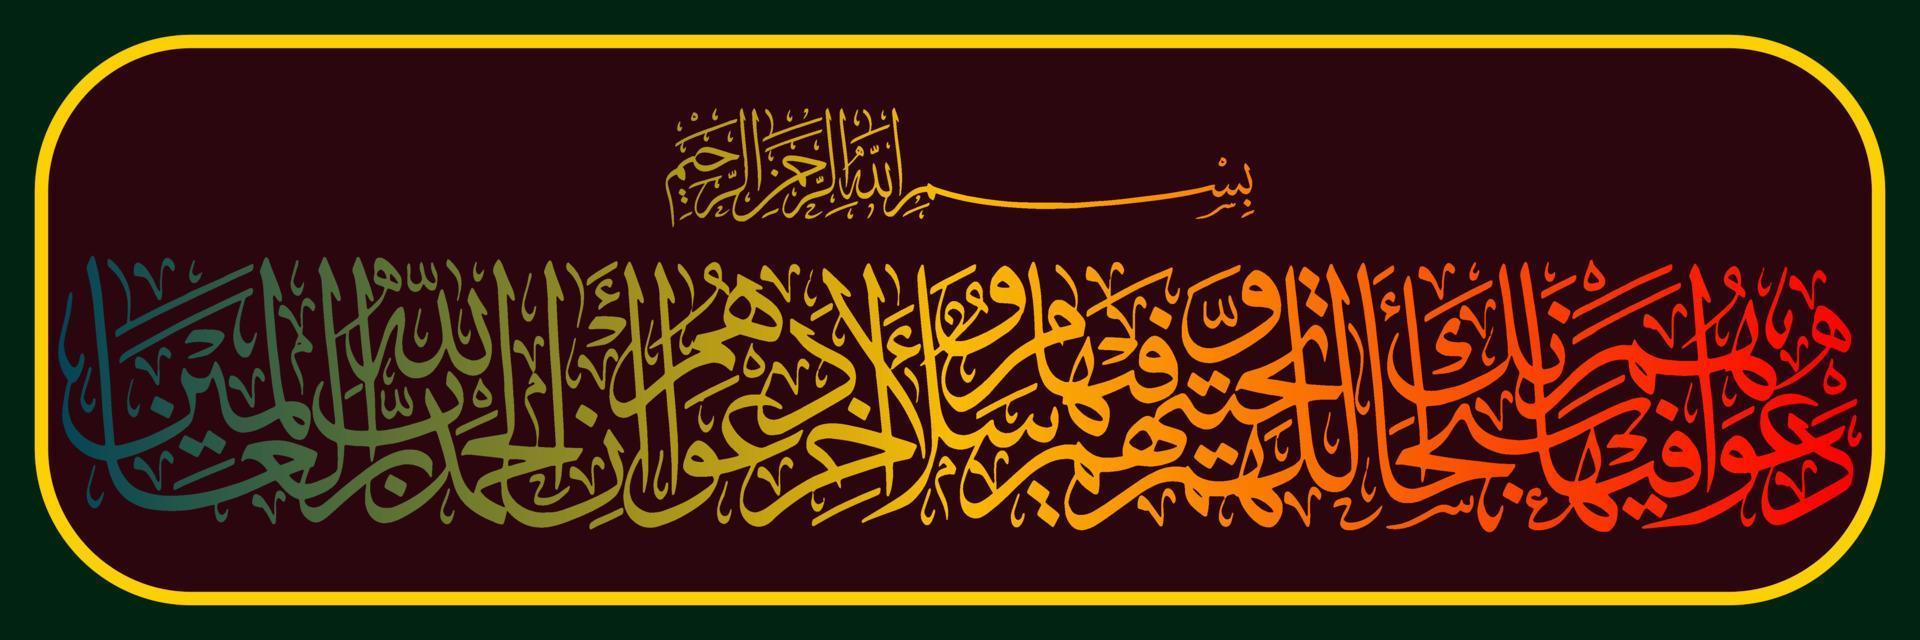 Arabic calligraphy, Quran Surah At Yunus Verse 10, translated Their prayer in it is, Blessed be You, O our Lord, and their salutation is, peace be upon you. And the closing of their prayer is, vector